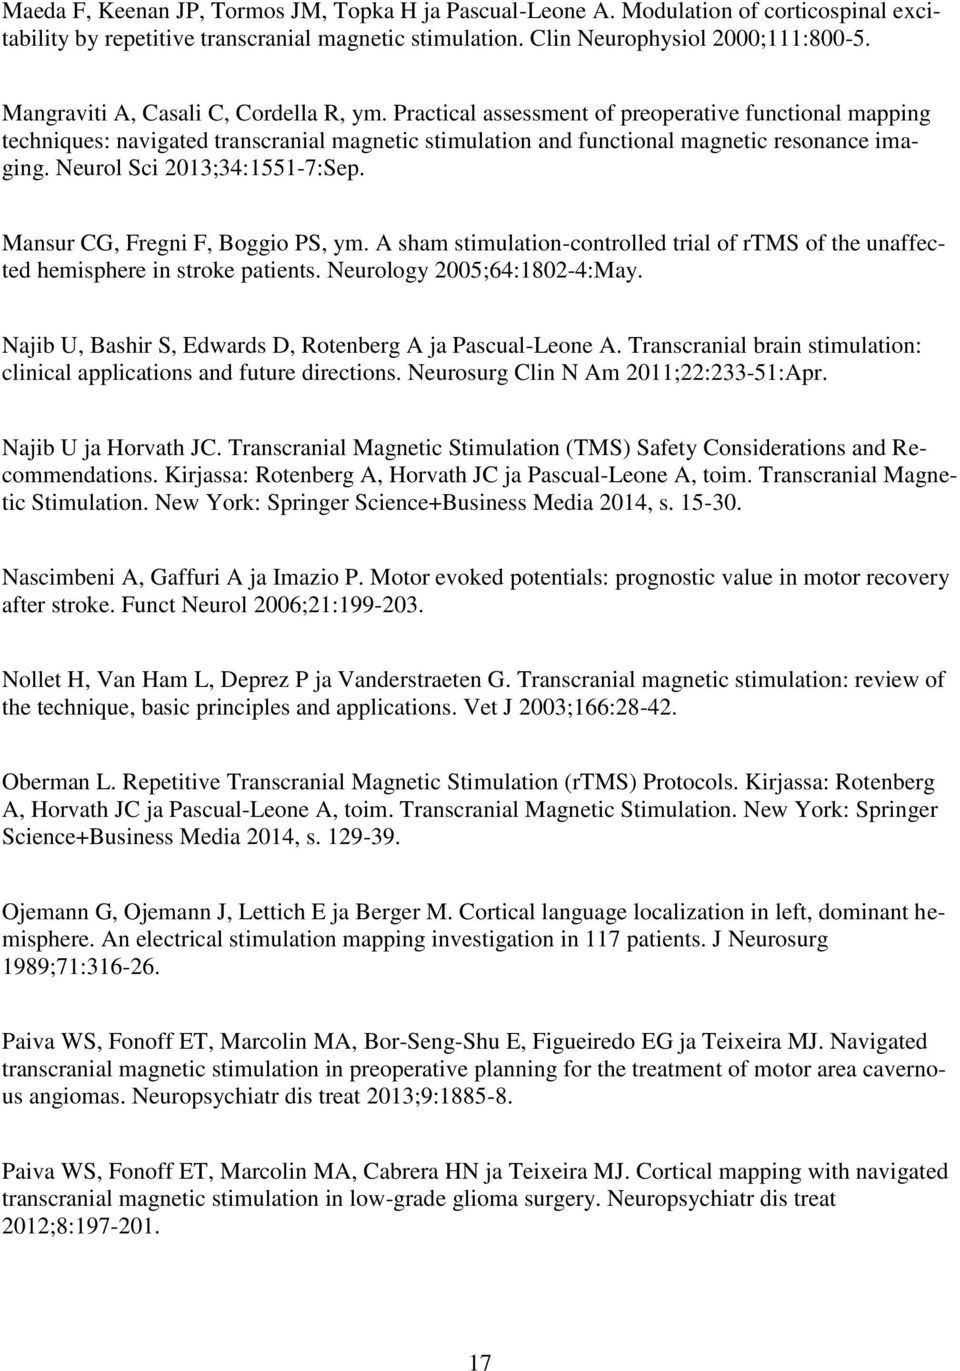 Neurol Sci 2013;34:1551-7:Sep. Mansur CG, Fregni F, Boggio PS, ym. A sham stimulation-controlled trial of rtms of the unaffected hemisphere in stroke patients. Neurology 2005;64:1802-4:May.